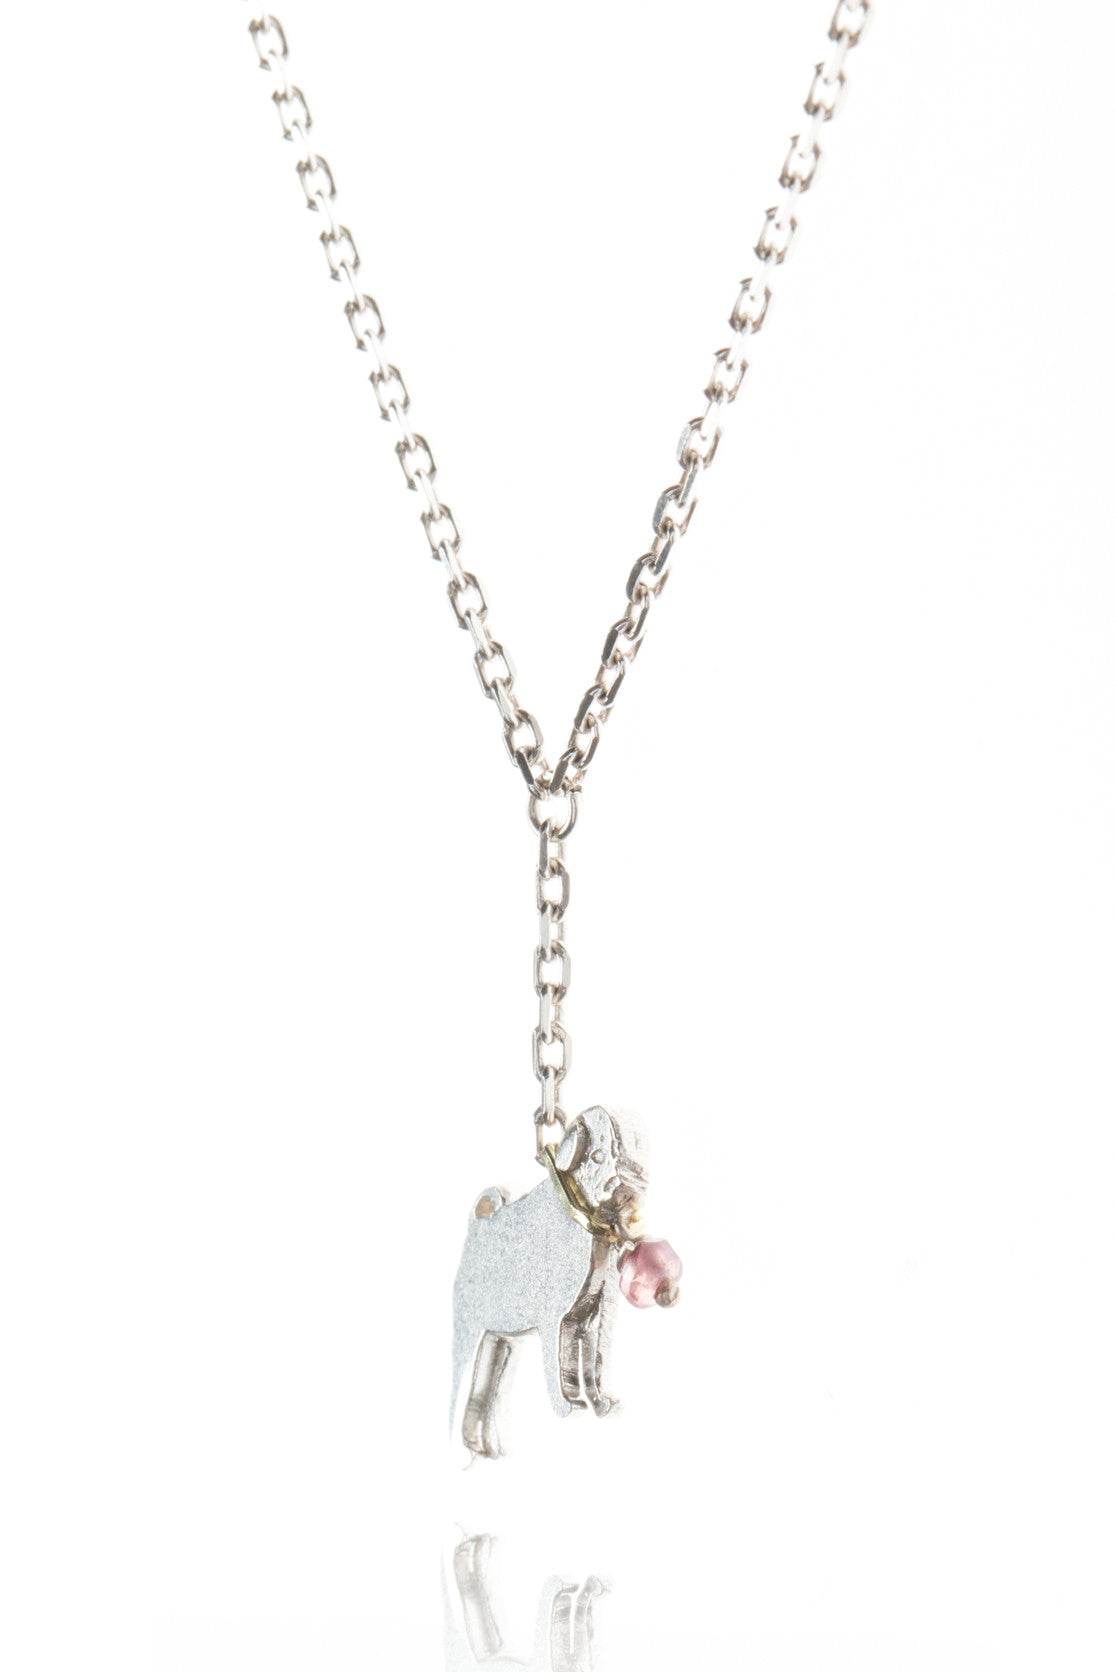 Pug on a lead bracelet, featuring a sterling silver pug with contrasting gold collar and pink moonstone charm